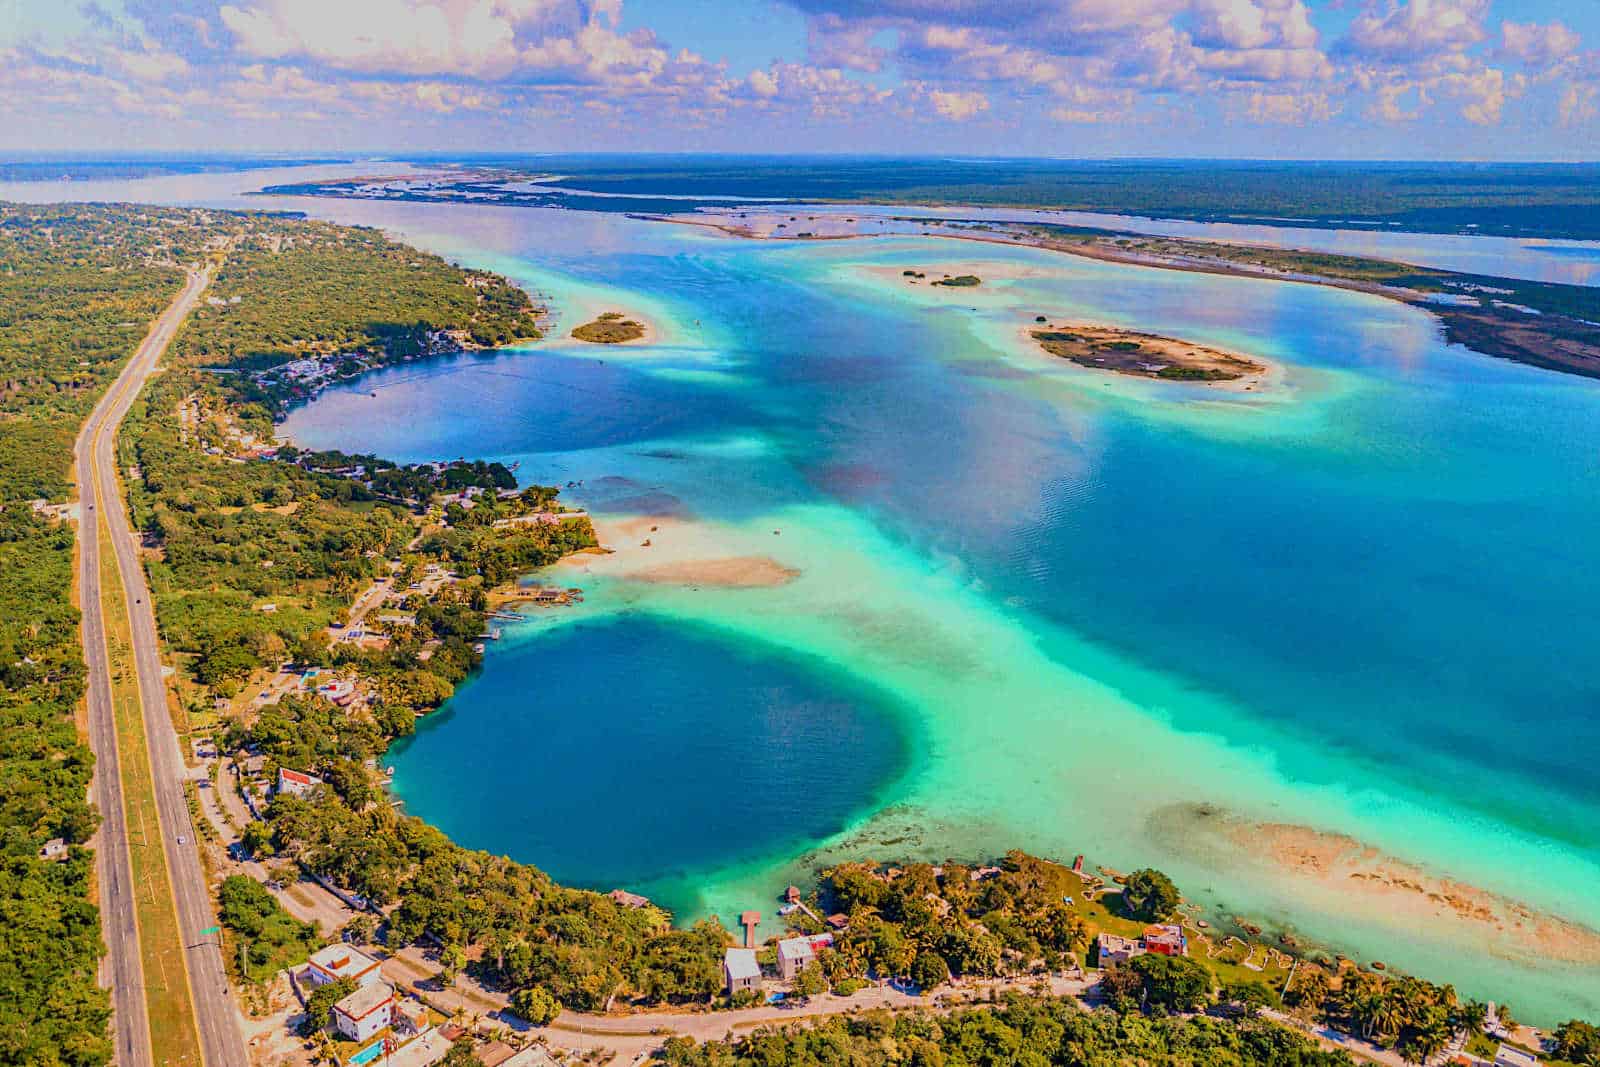 Bacalar - how to get there